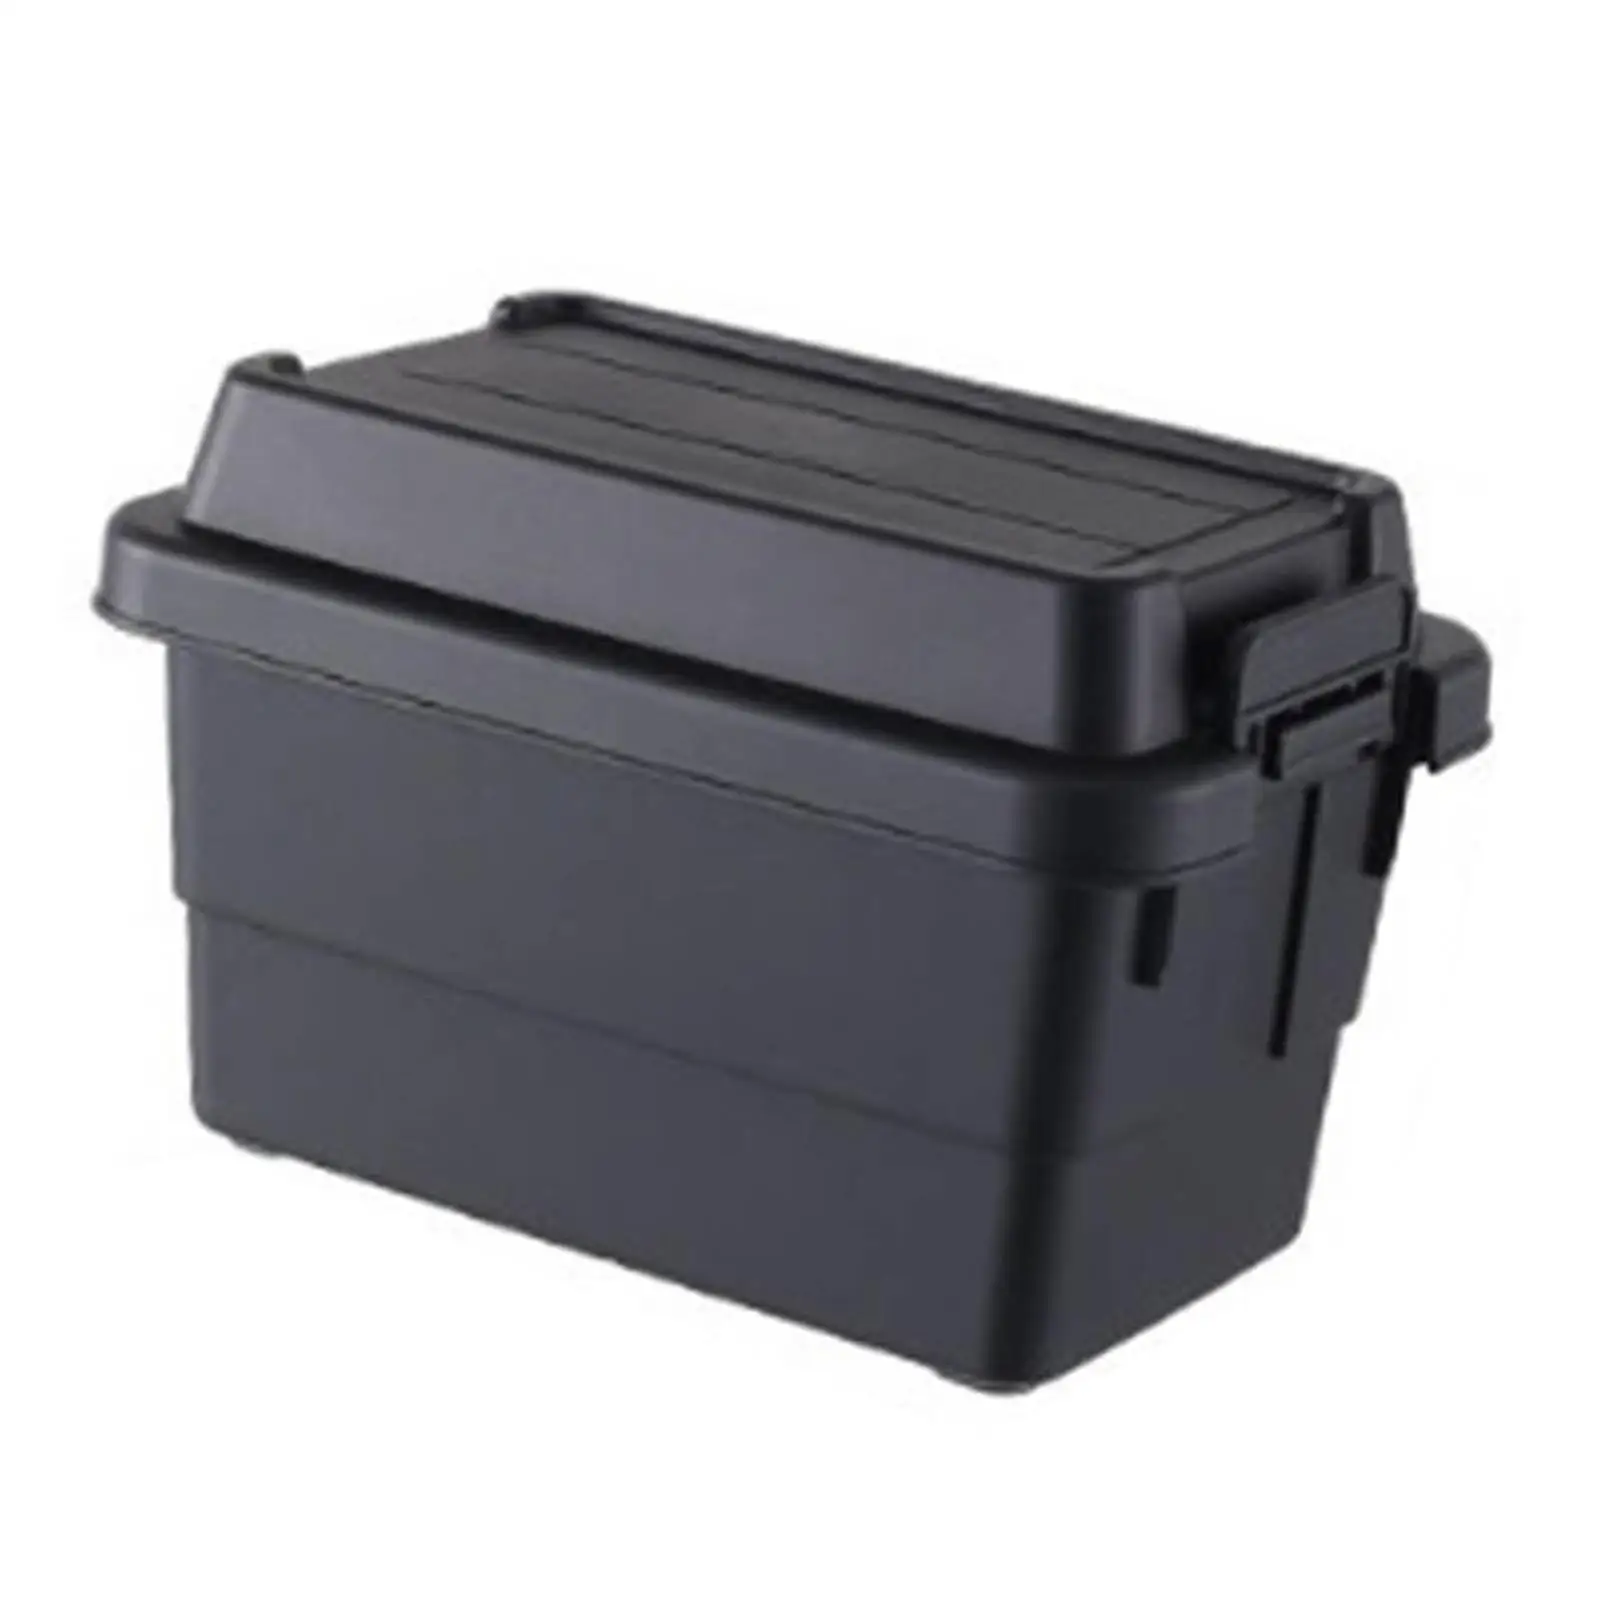 Camping Storage Box Lockable Storage Bin with Lid Durable Small Storage Case for